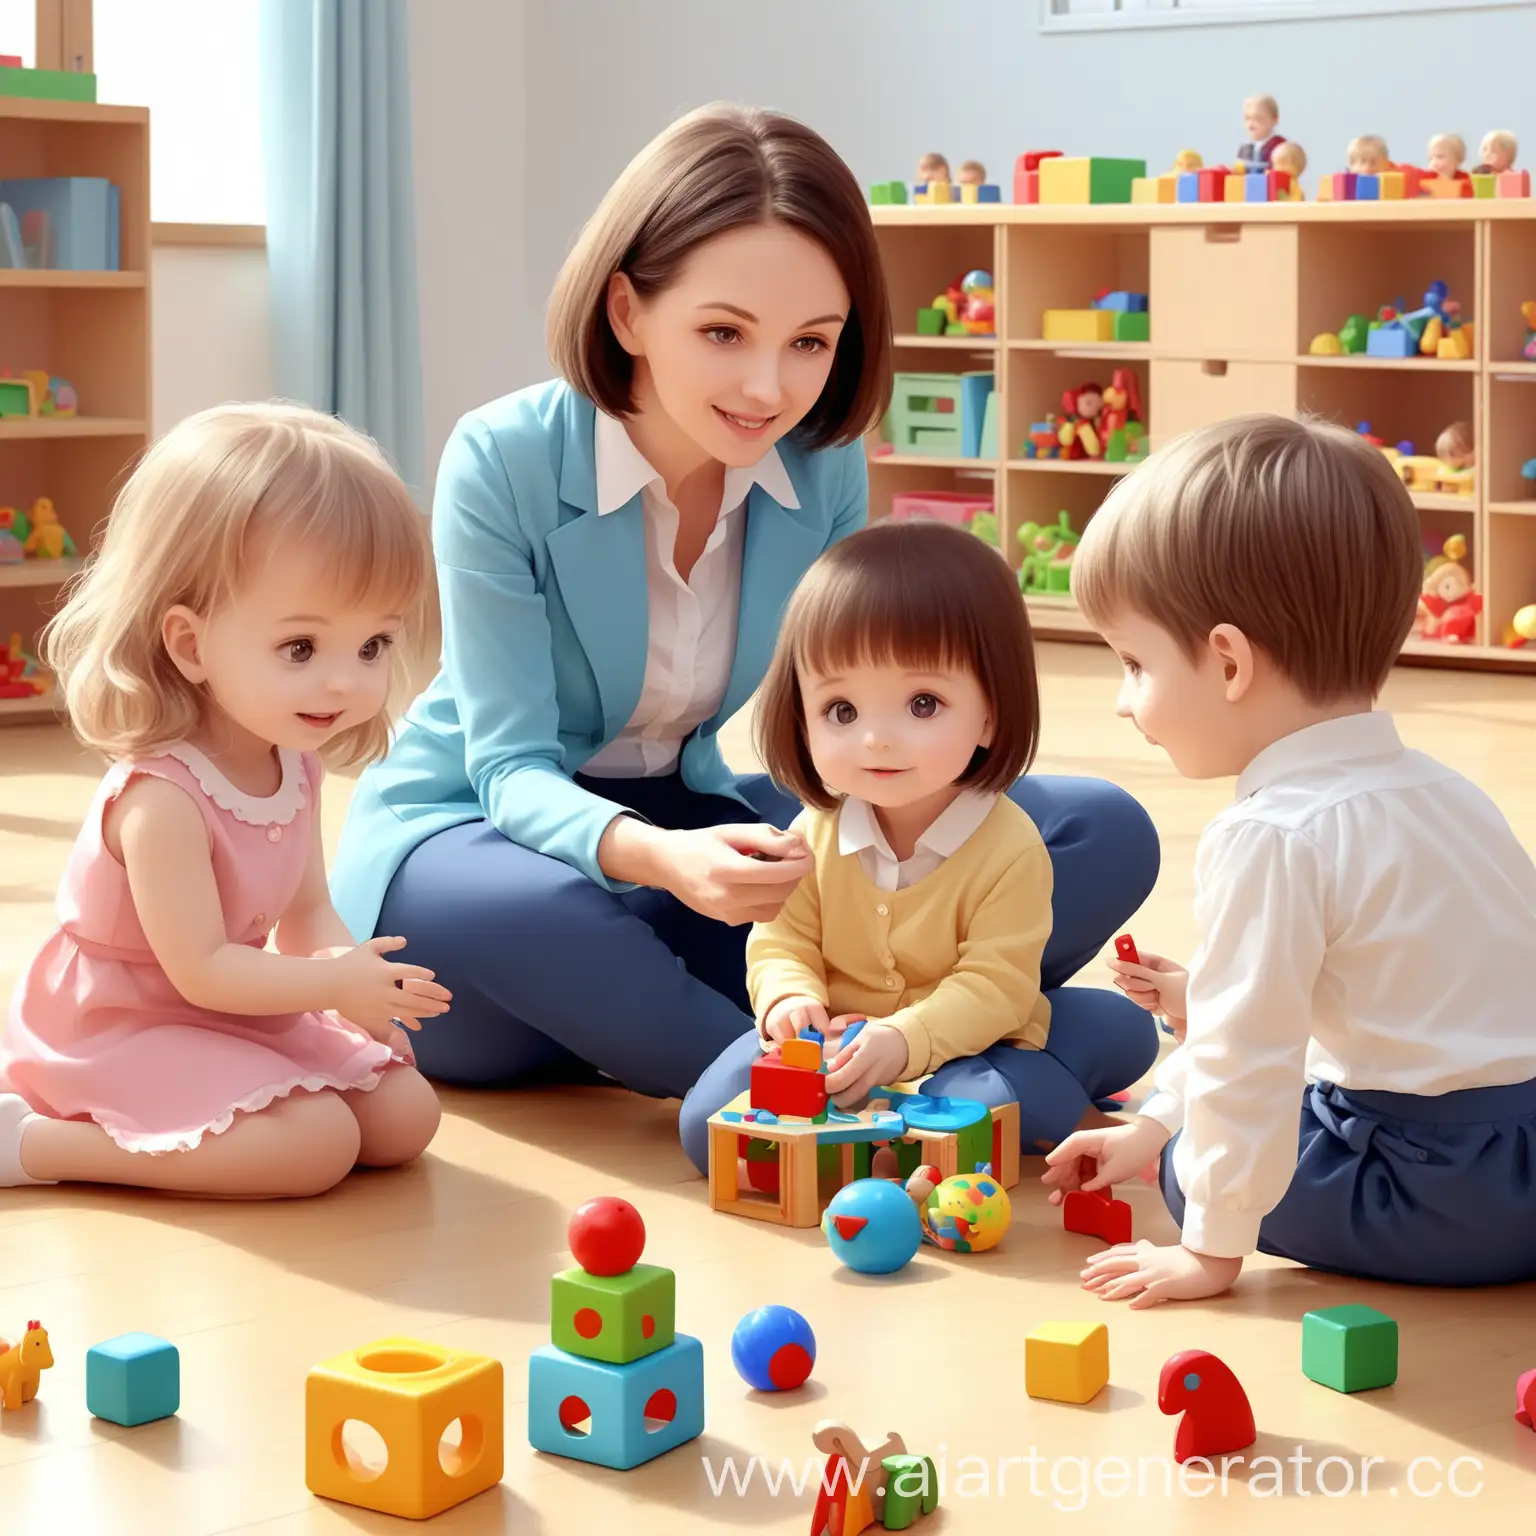 kindergarden with five happy children. children play toys and comunicate. two children site on floor and plays toys. three children play with teacher at the table. 
childerens' face are  natural cute. and teacher with them